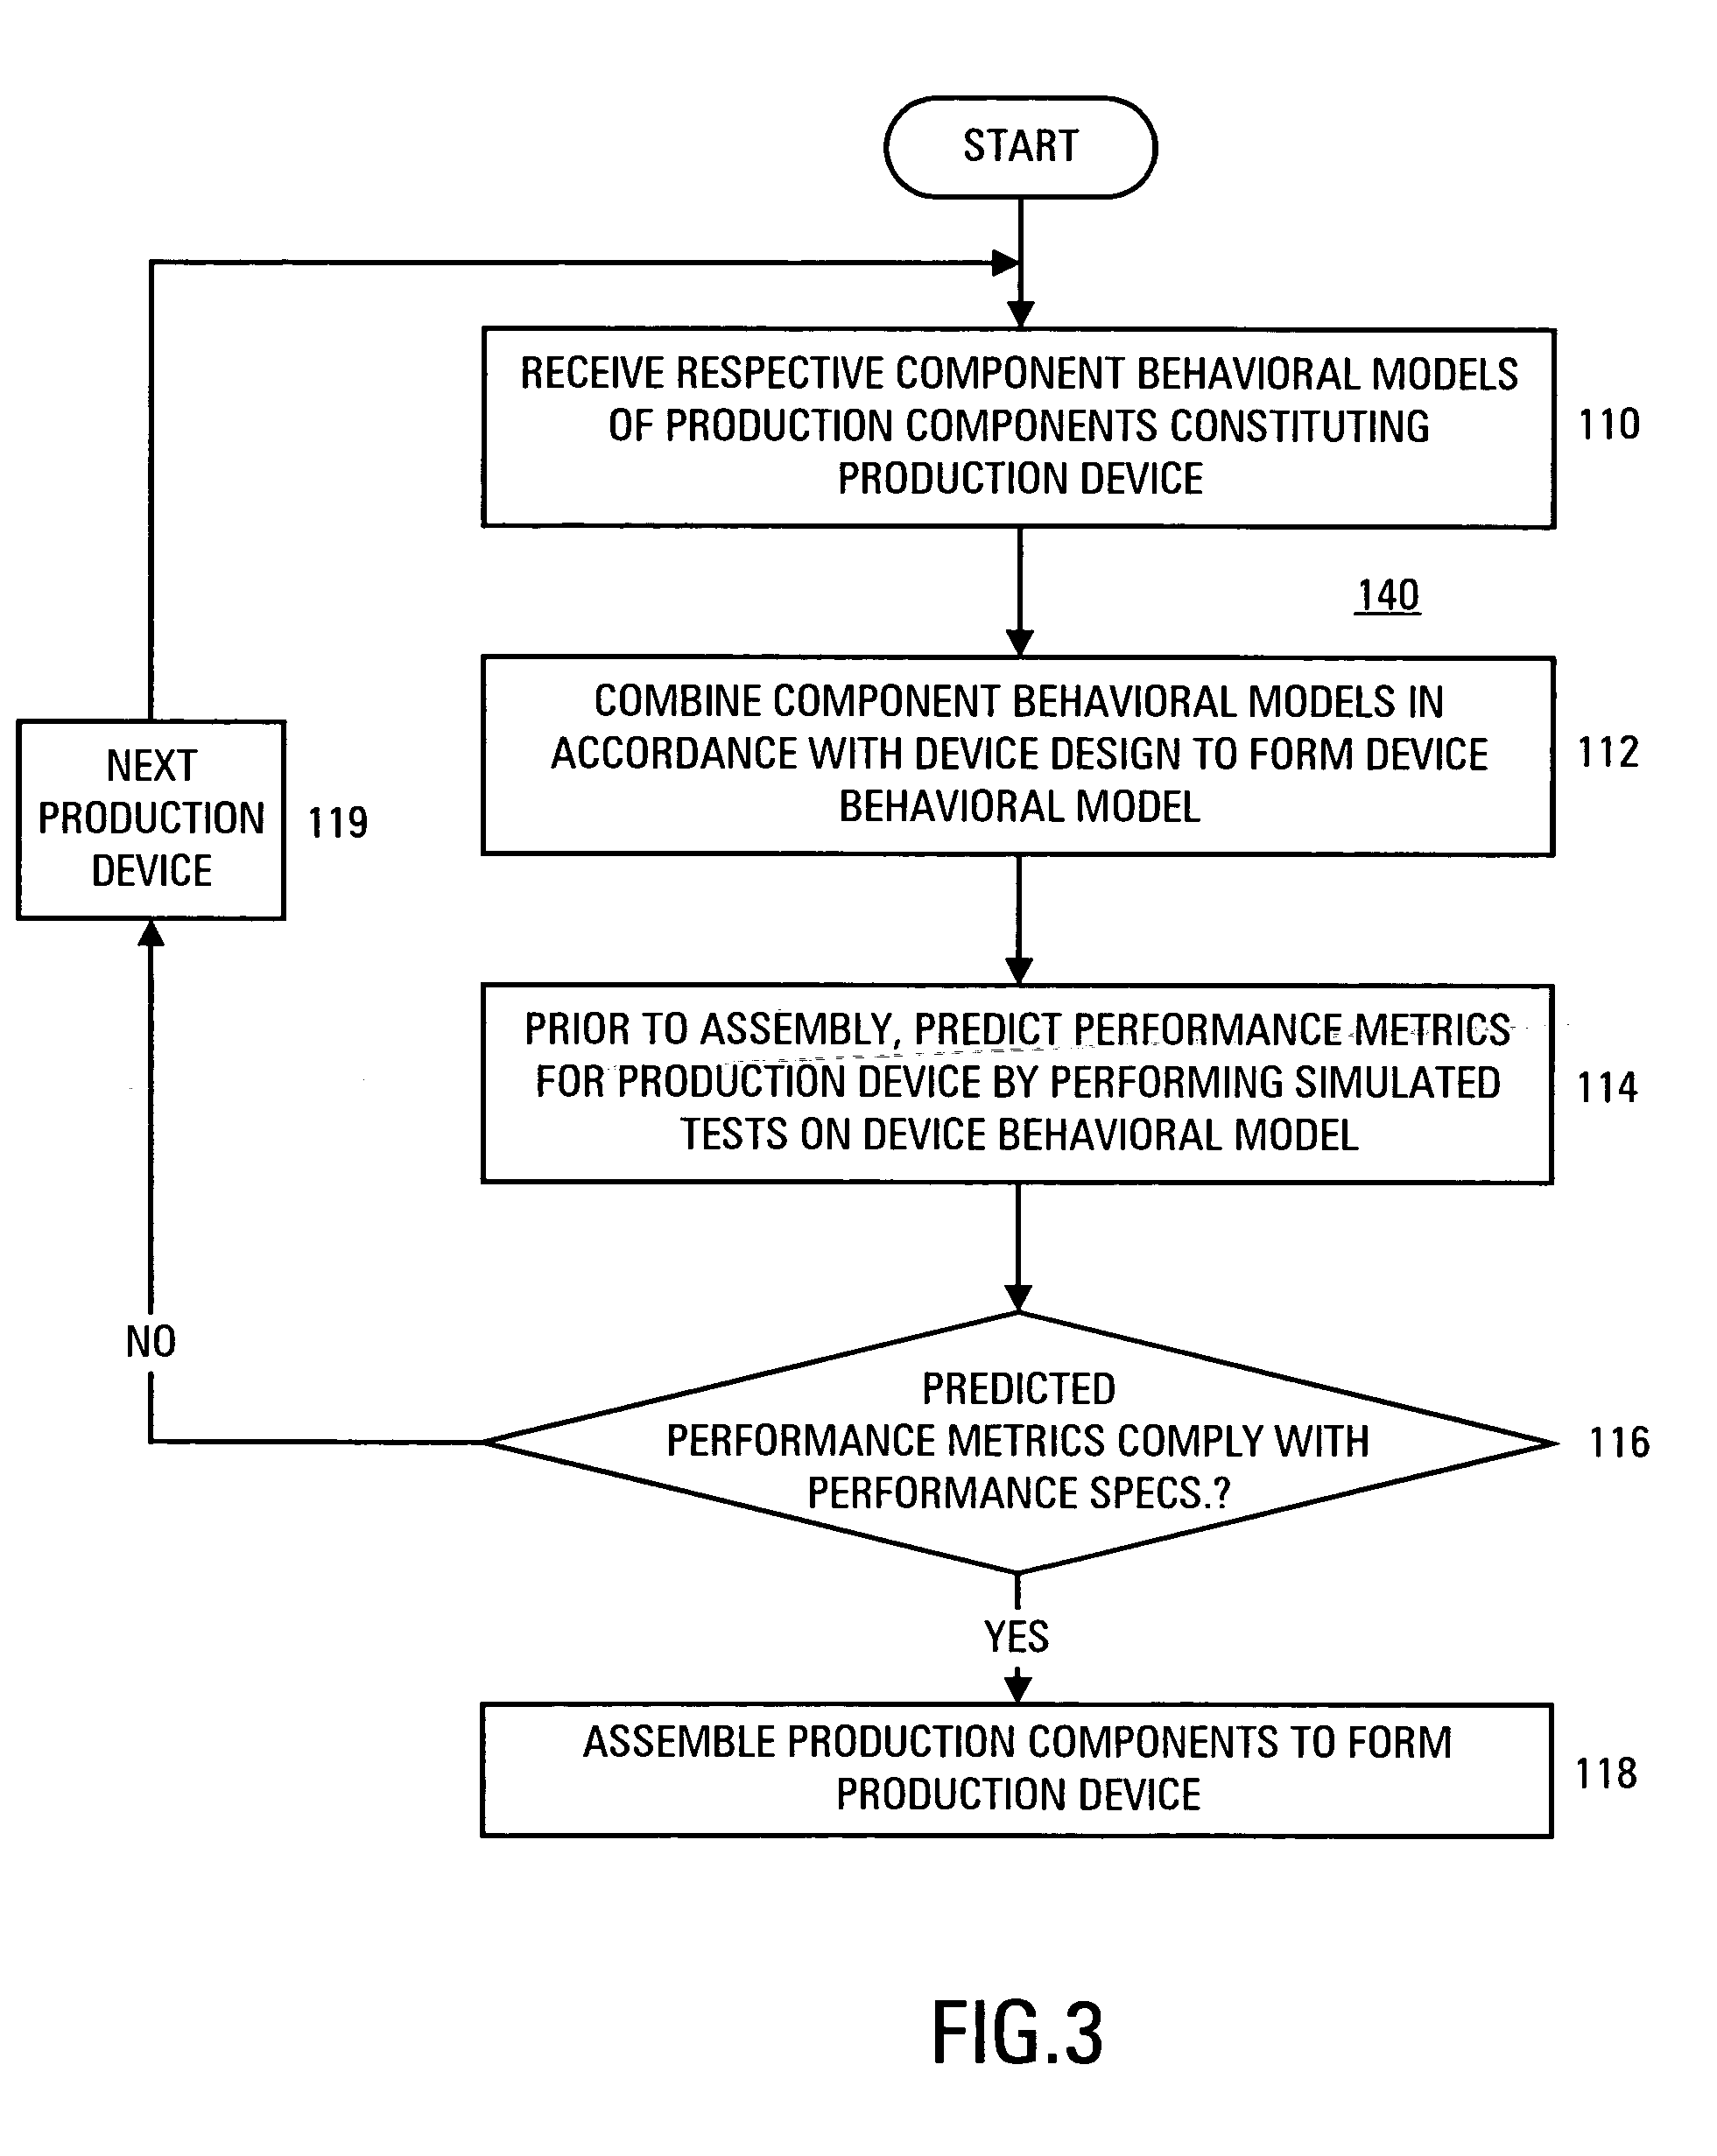 Model-based pre-assembly testing of multi-component production devices